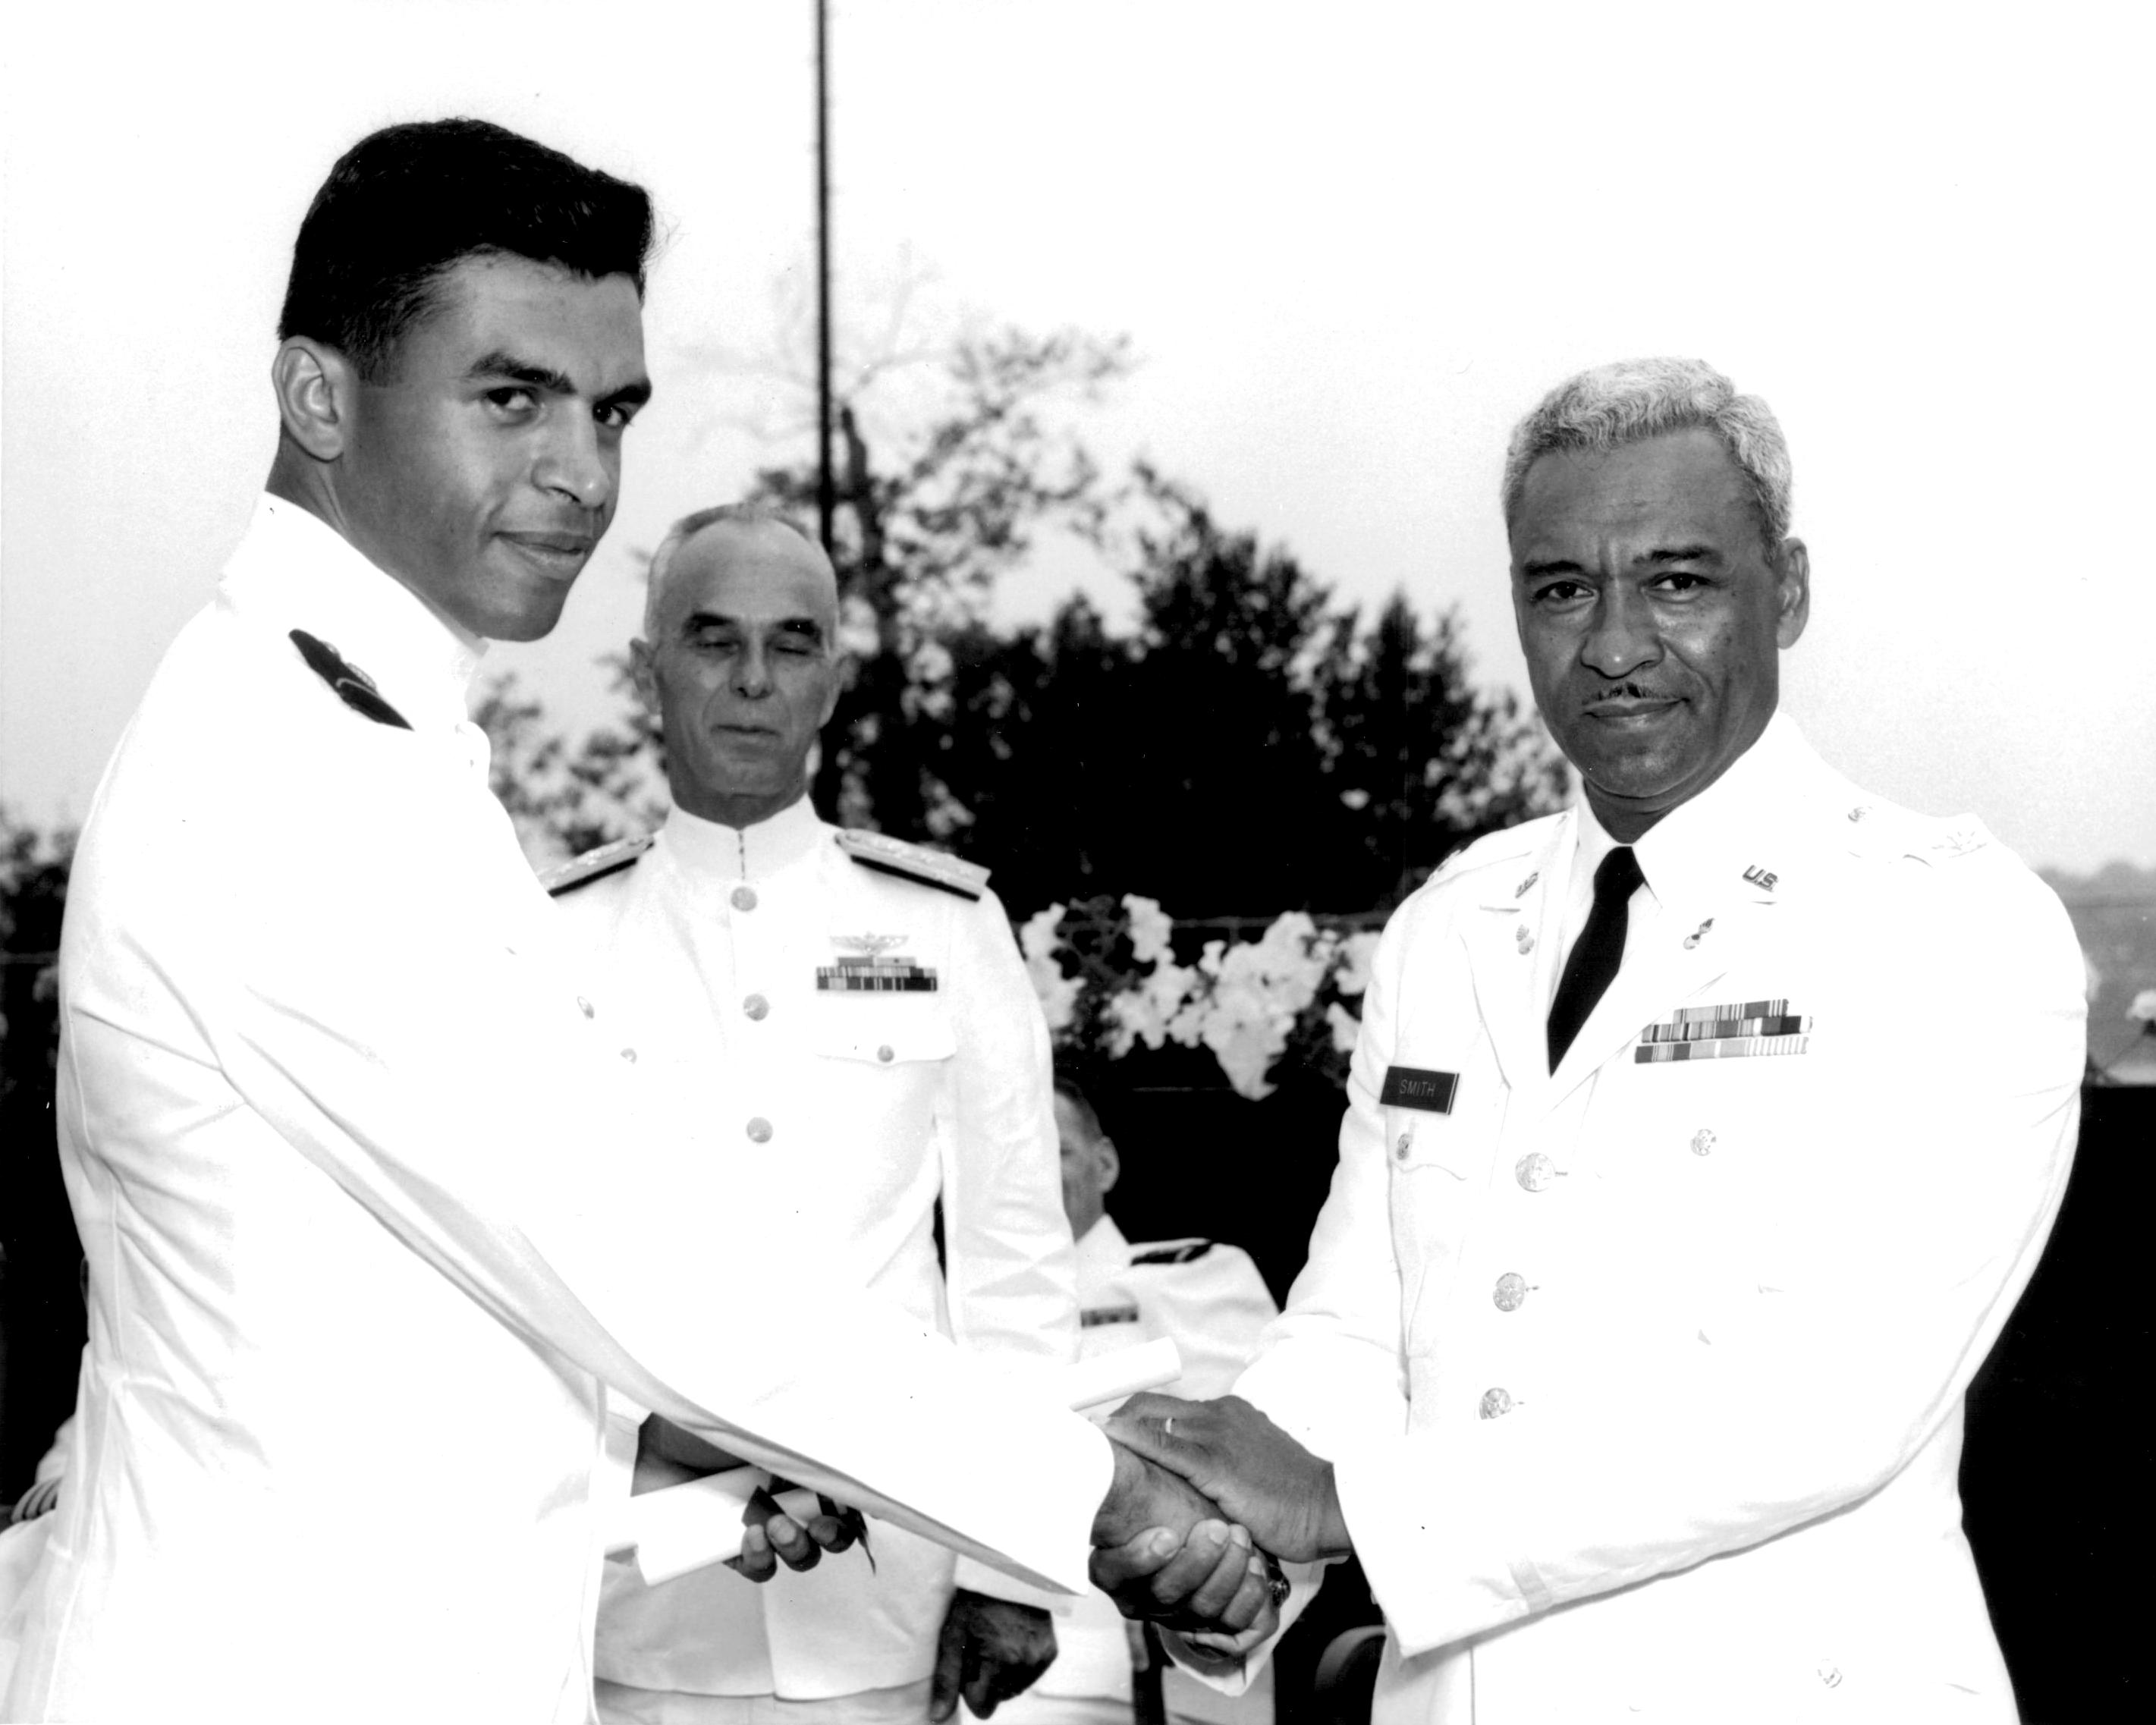 10.	Merle Smith, a 1966 Coast Guard Academy graduate, was the first African-American graduate of the academy. He went on to become a distinguished combat officer in Vietnam, earning the Bronze Star Medal. (U.S. Coast Guard)